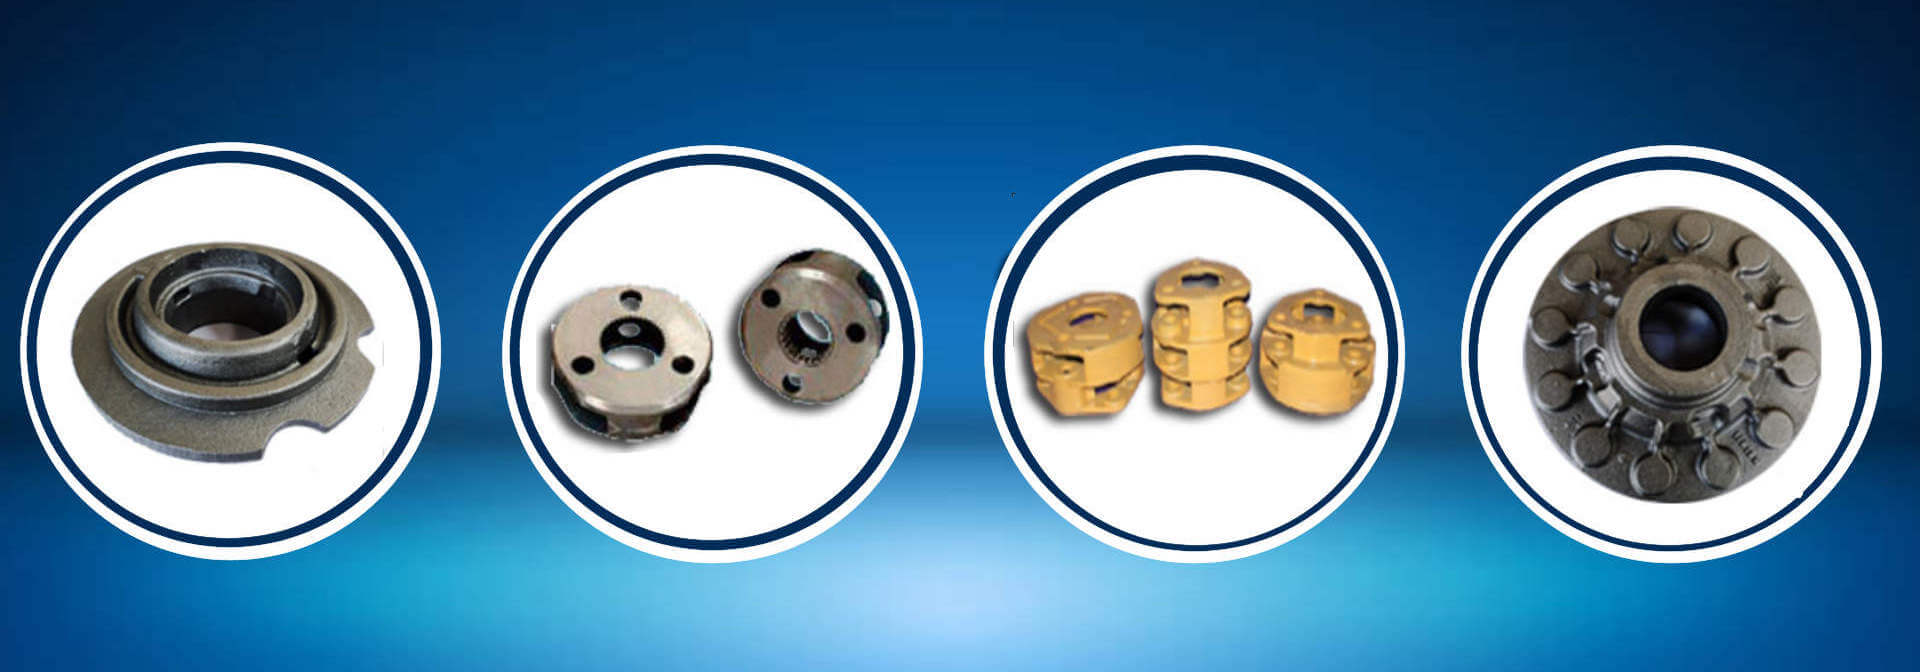 Ductile Iron Casting, Ferrous Castings, Foundry Casting, Hub Gear Carriers, Machined Components, Nodular Iron Casting, Sg Iron Castings